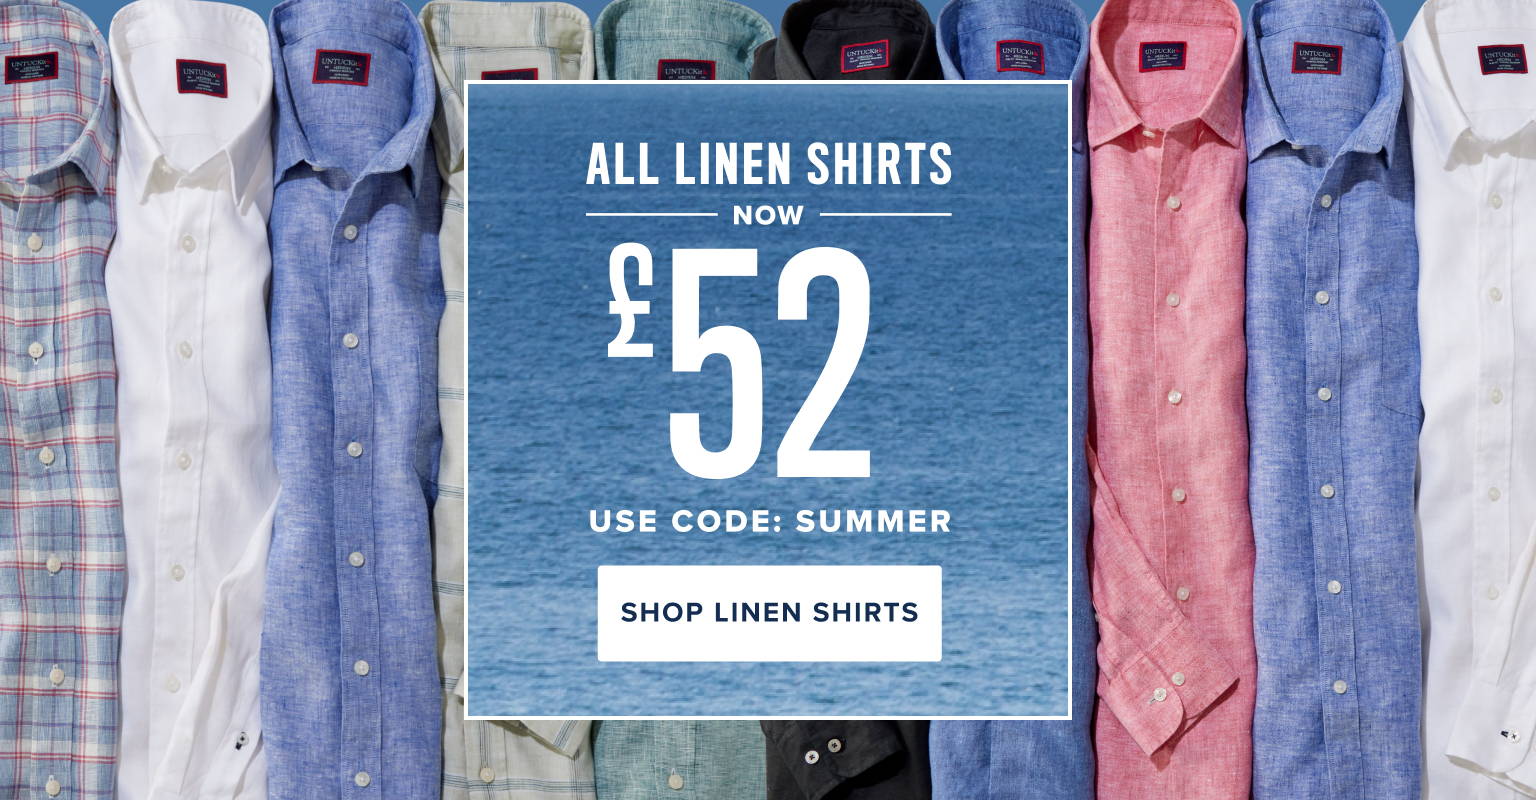 all linen shirts now £52. use code: summer